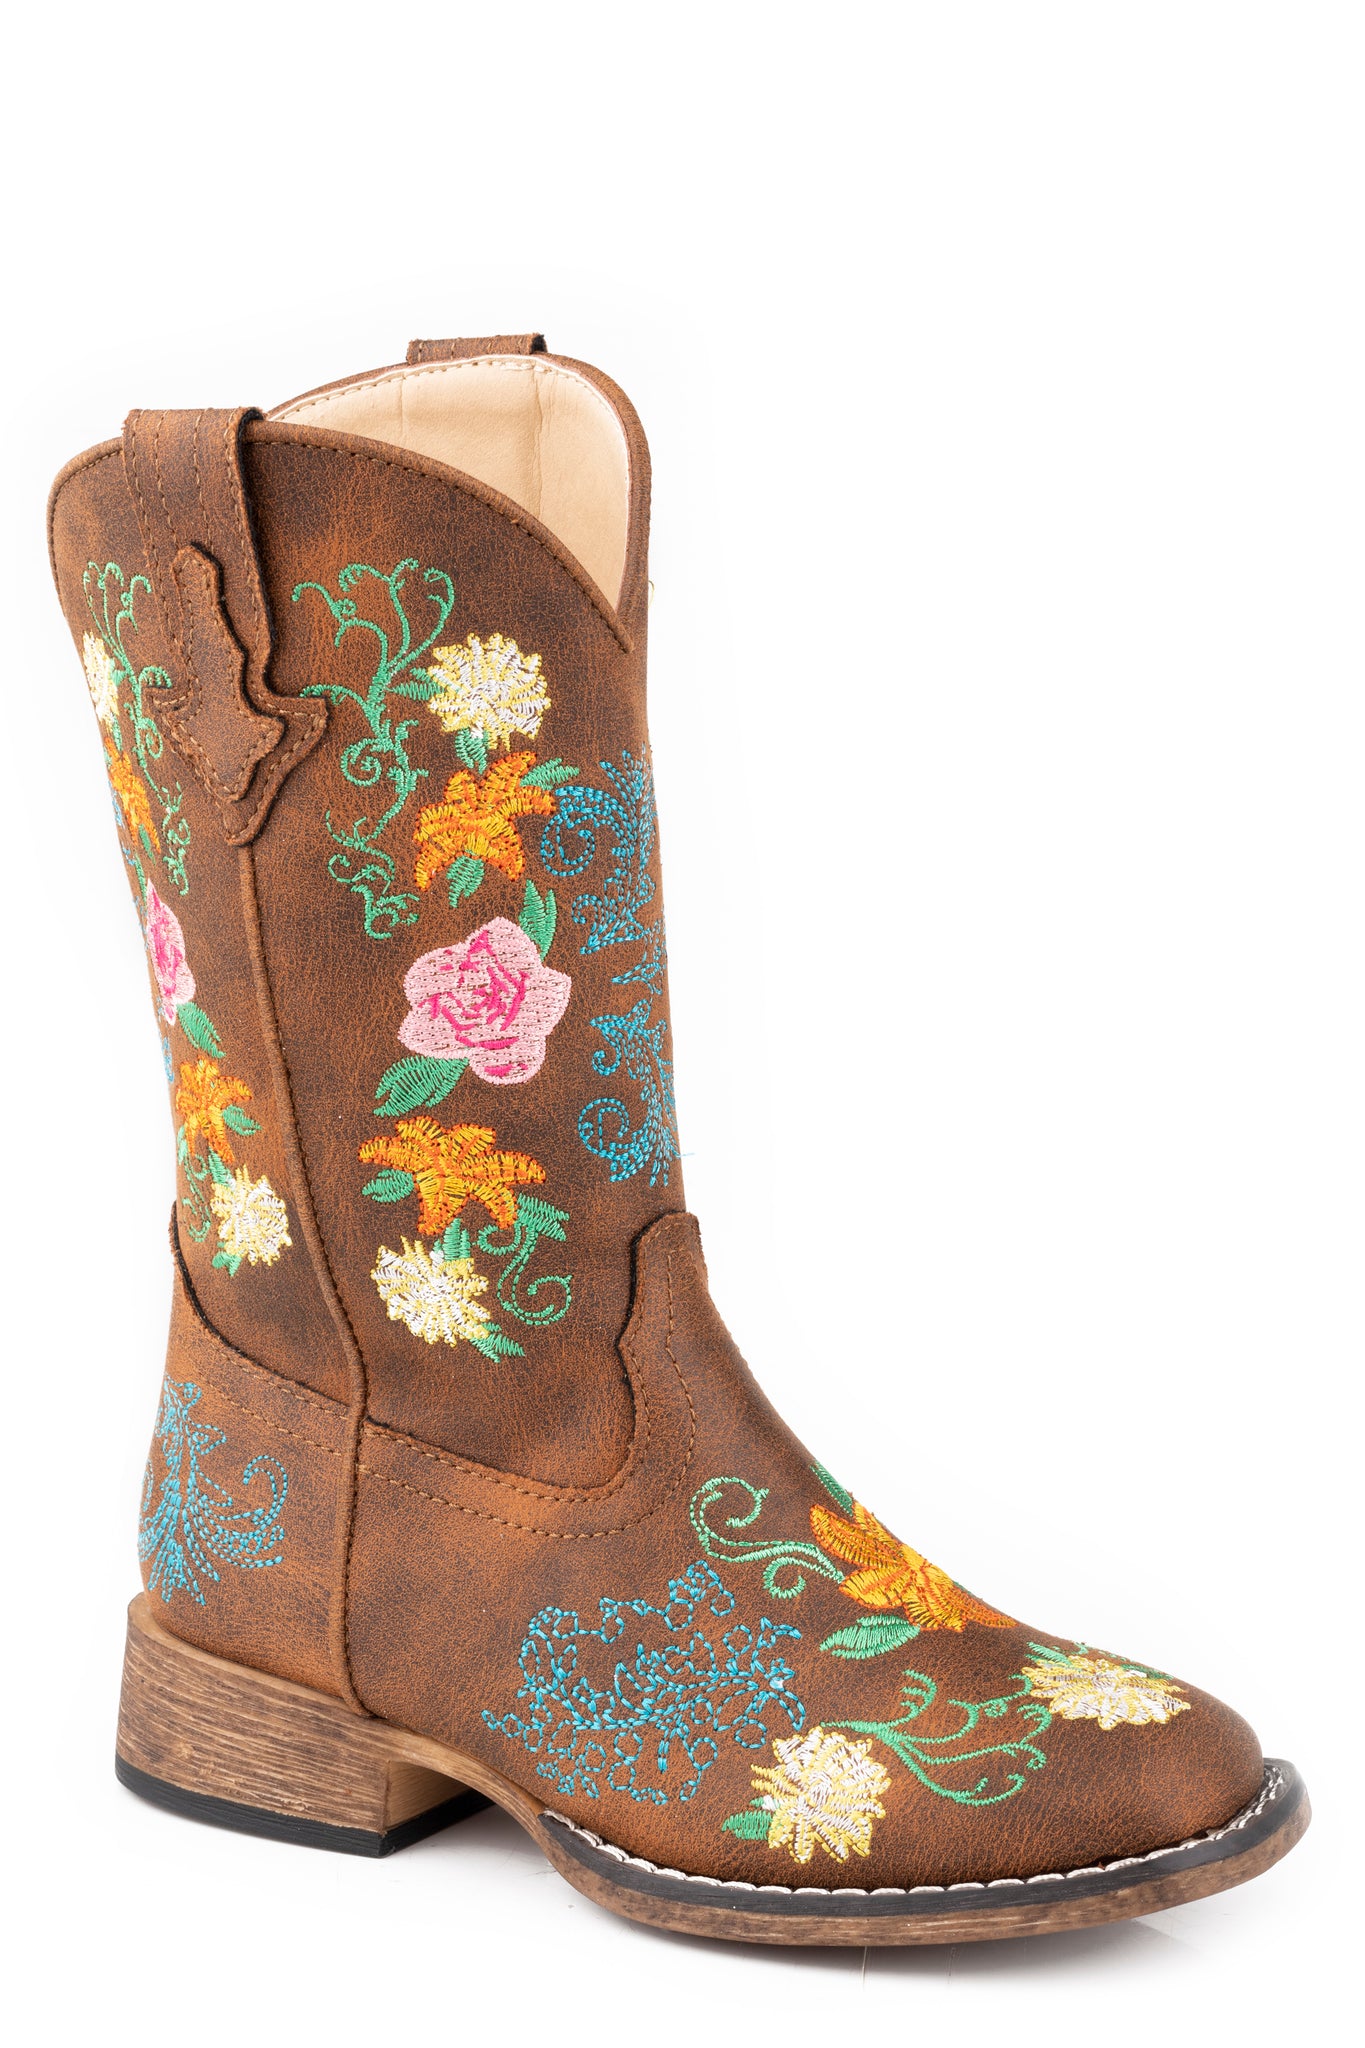 09-018-1903-3438 Roper Little Kids Bailey Floral Boots Tan Emboidered